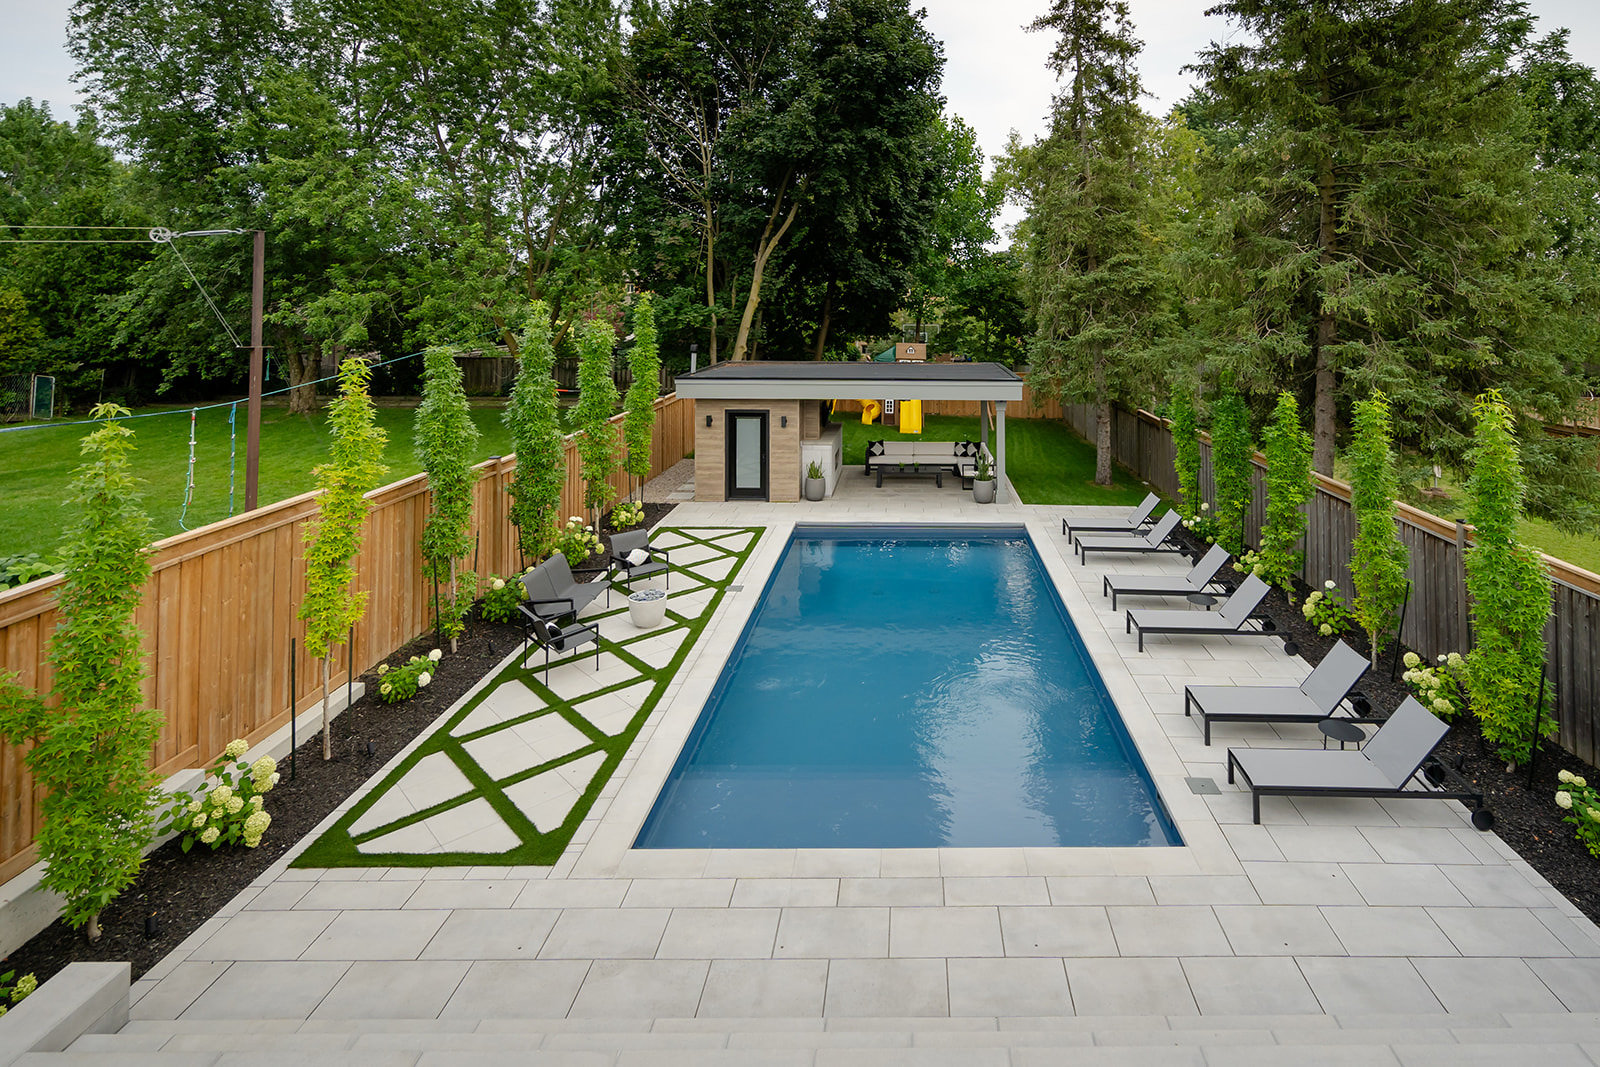 An inground pool with lounge chairs on the right and 3 chairs on the left.  Along the fences are trees planted.